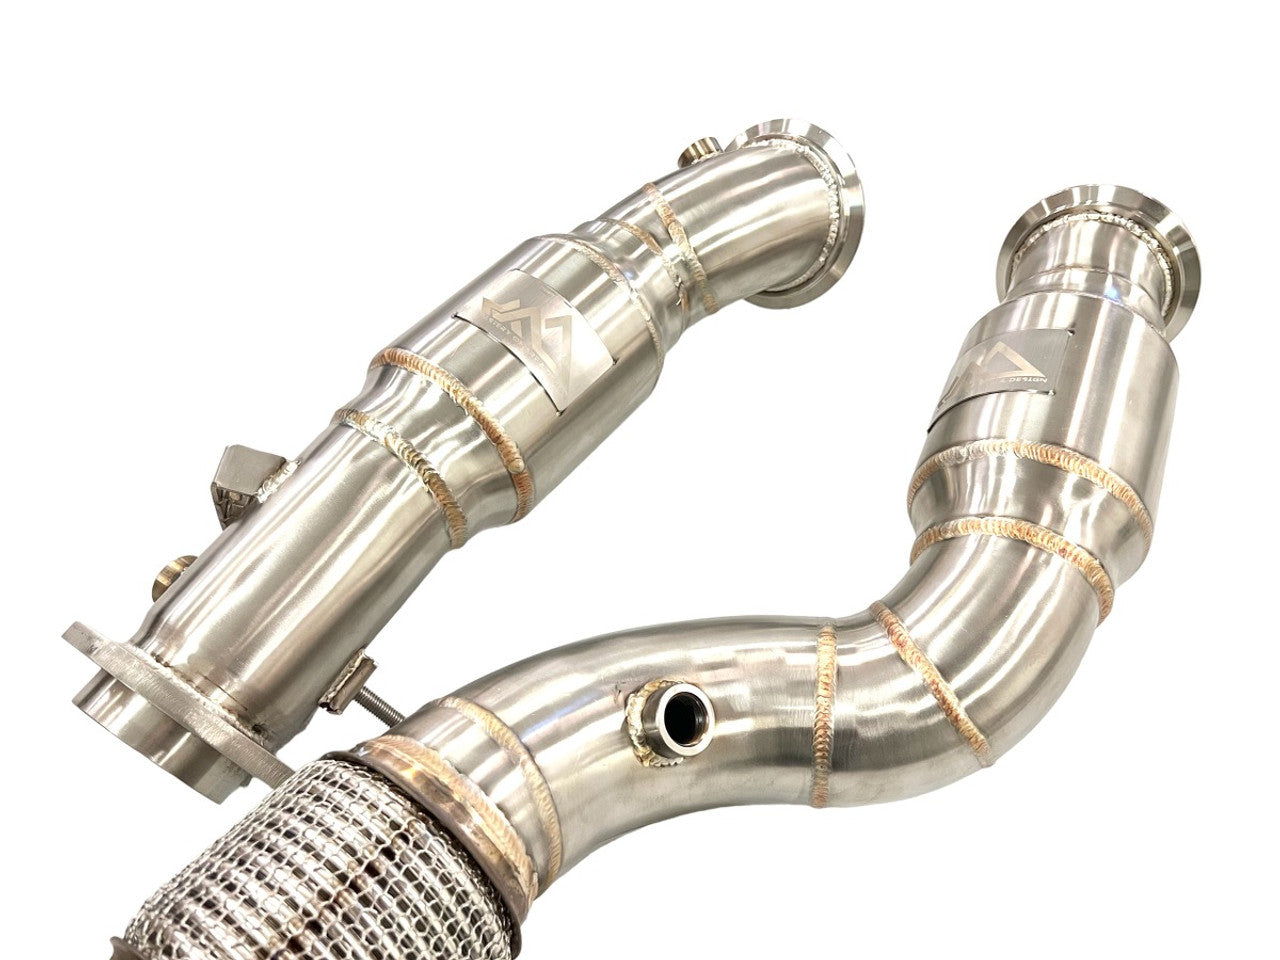 MAD - Resonated Downpipes w/ Flex Section || S58 (M4/M3/M2C) PREORDER